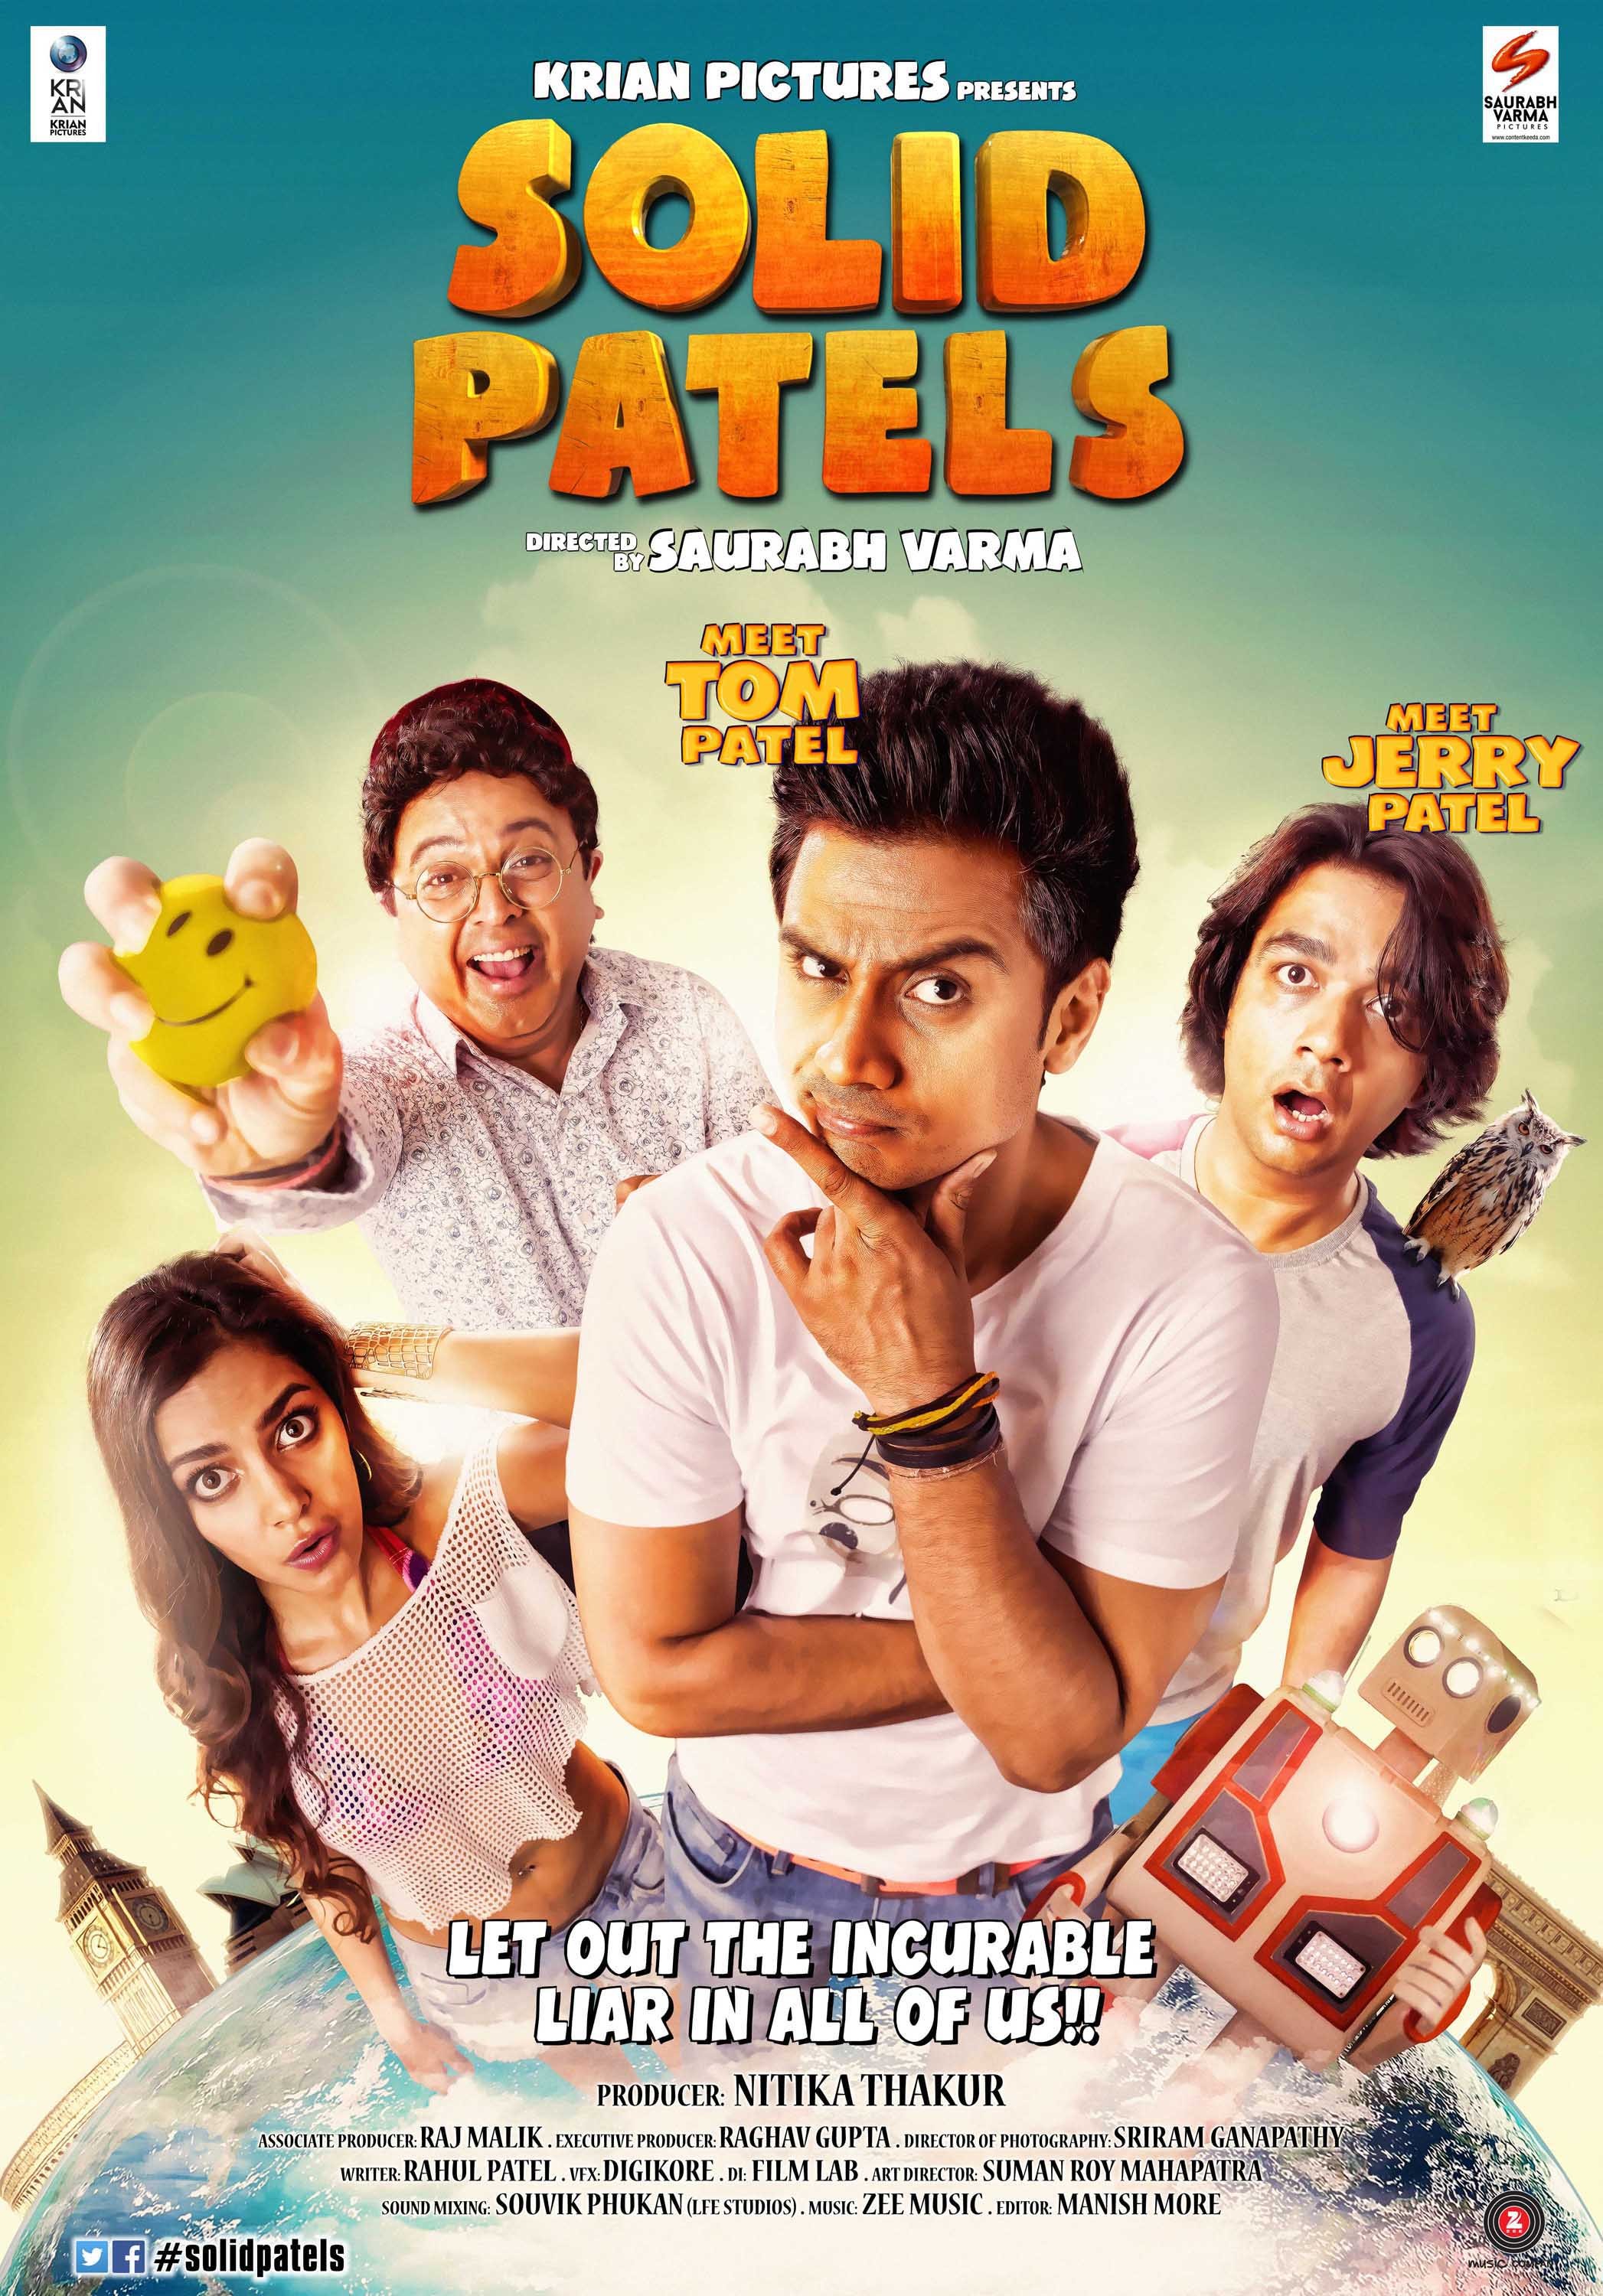 Mega Sized Movie Poster Image for Solid Patels (#2 of 8)